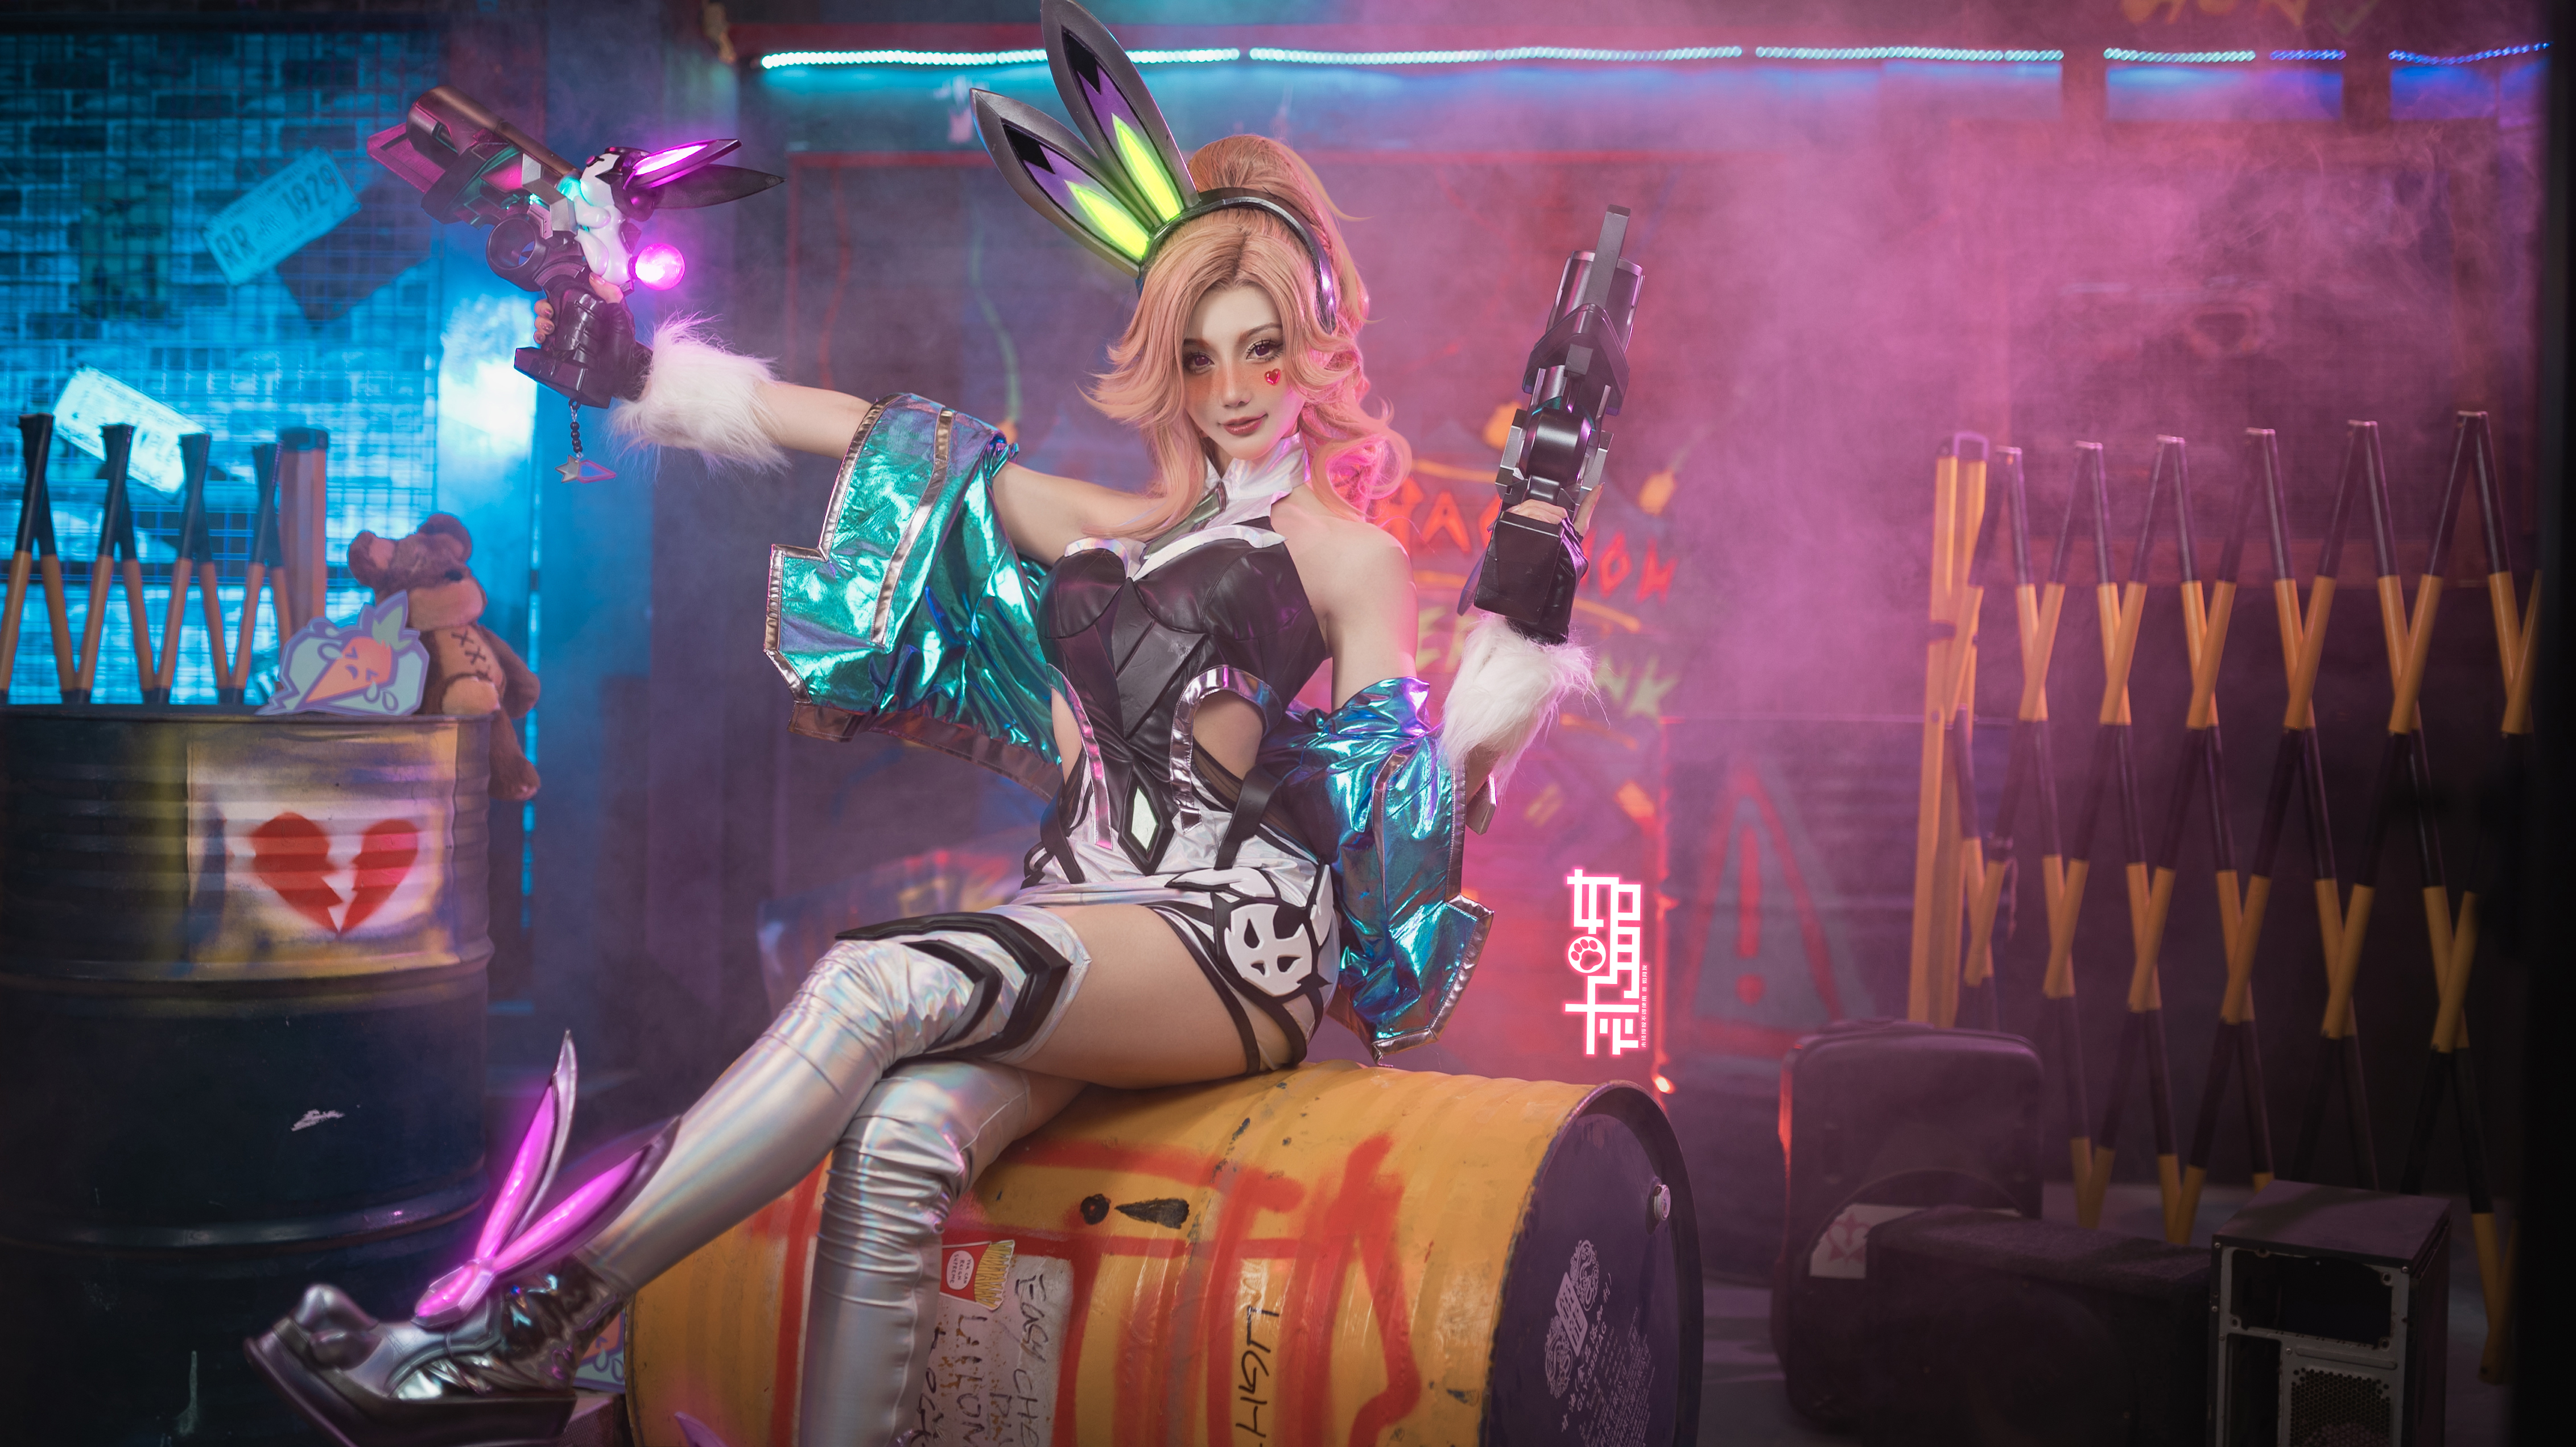 People 4528x2544 cosplay League of Legends KisaragiAsh Battle bunny (league of legends) graffiti Miss Fortune (League of Legends) Riot Games video game characters